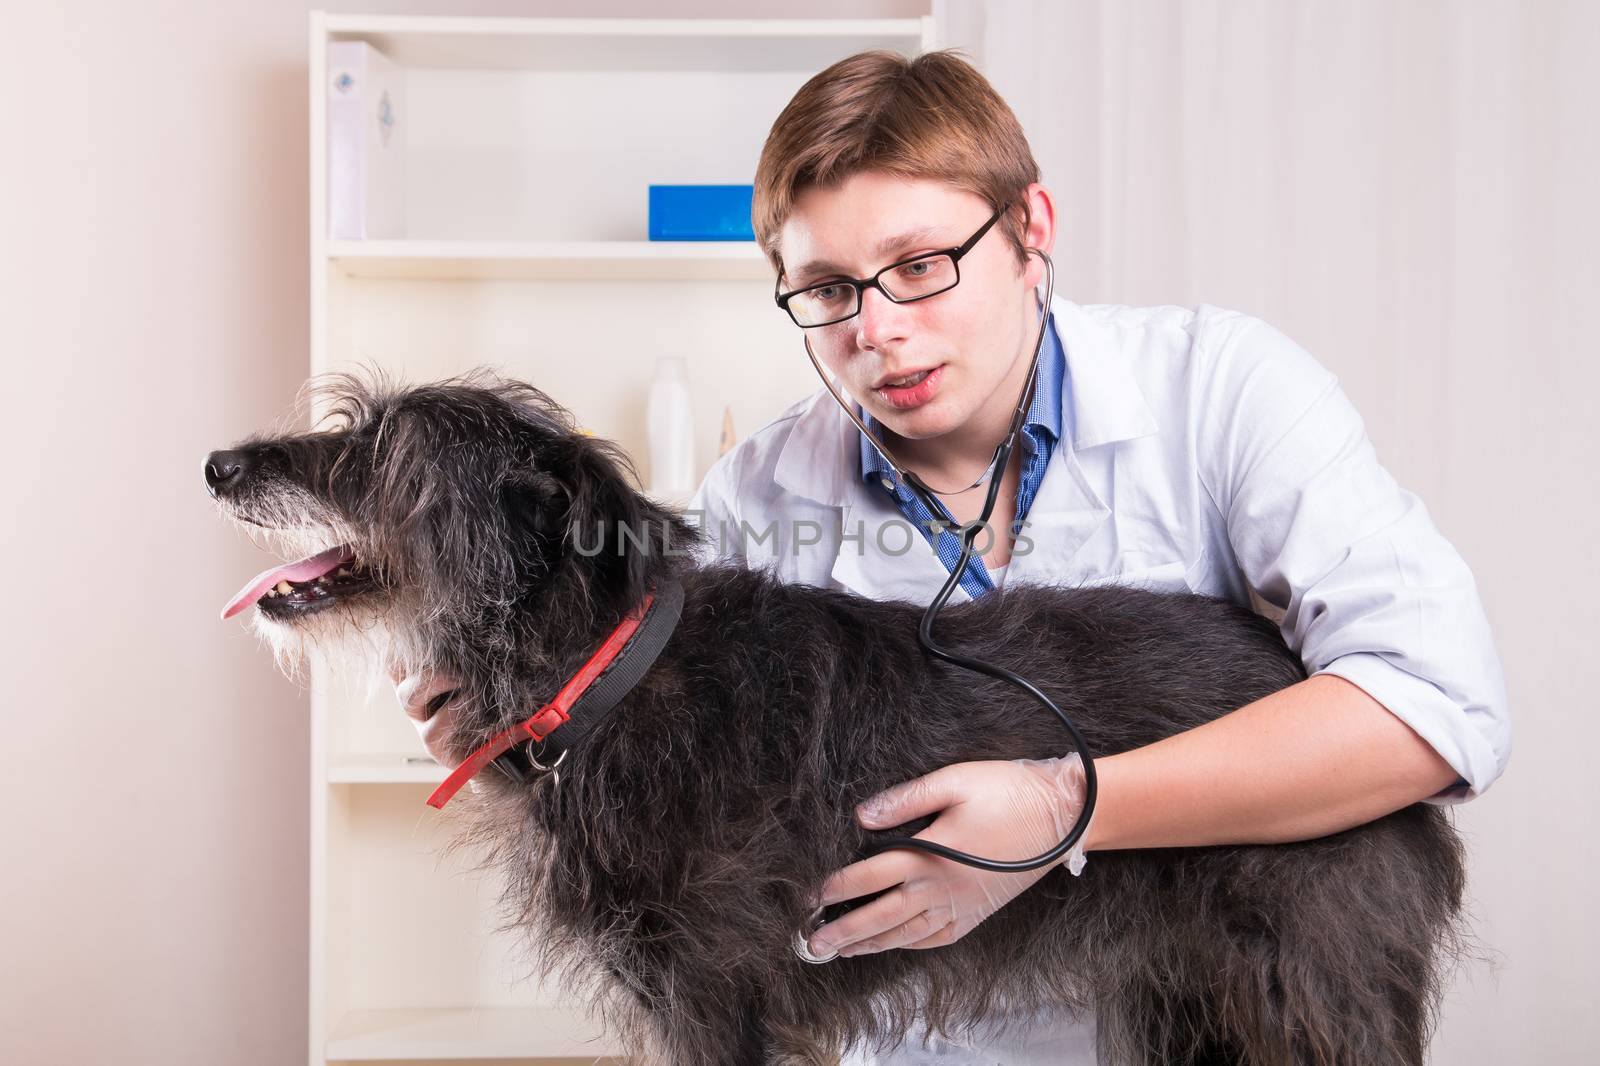 Vet examining a dog with a stethoscope in the office by MichalLudwiczak